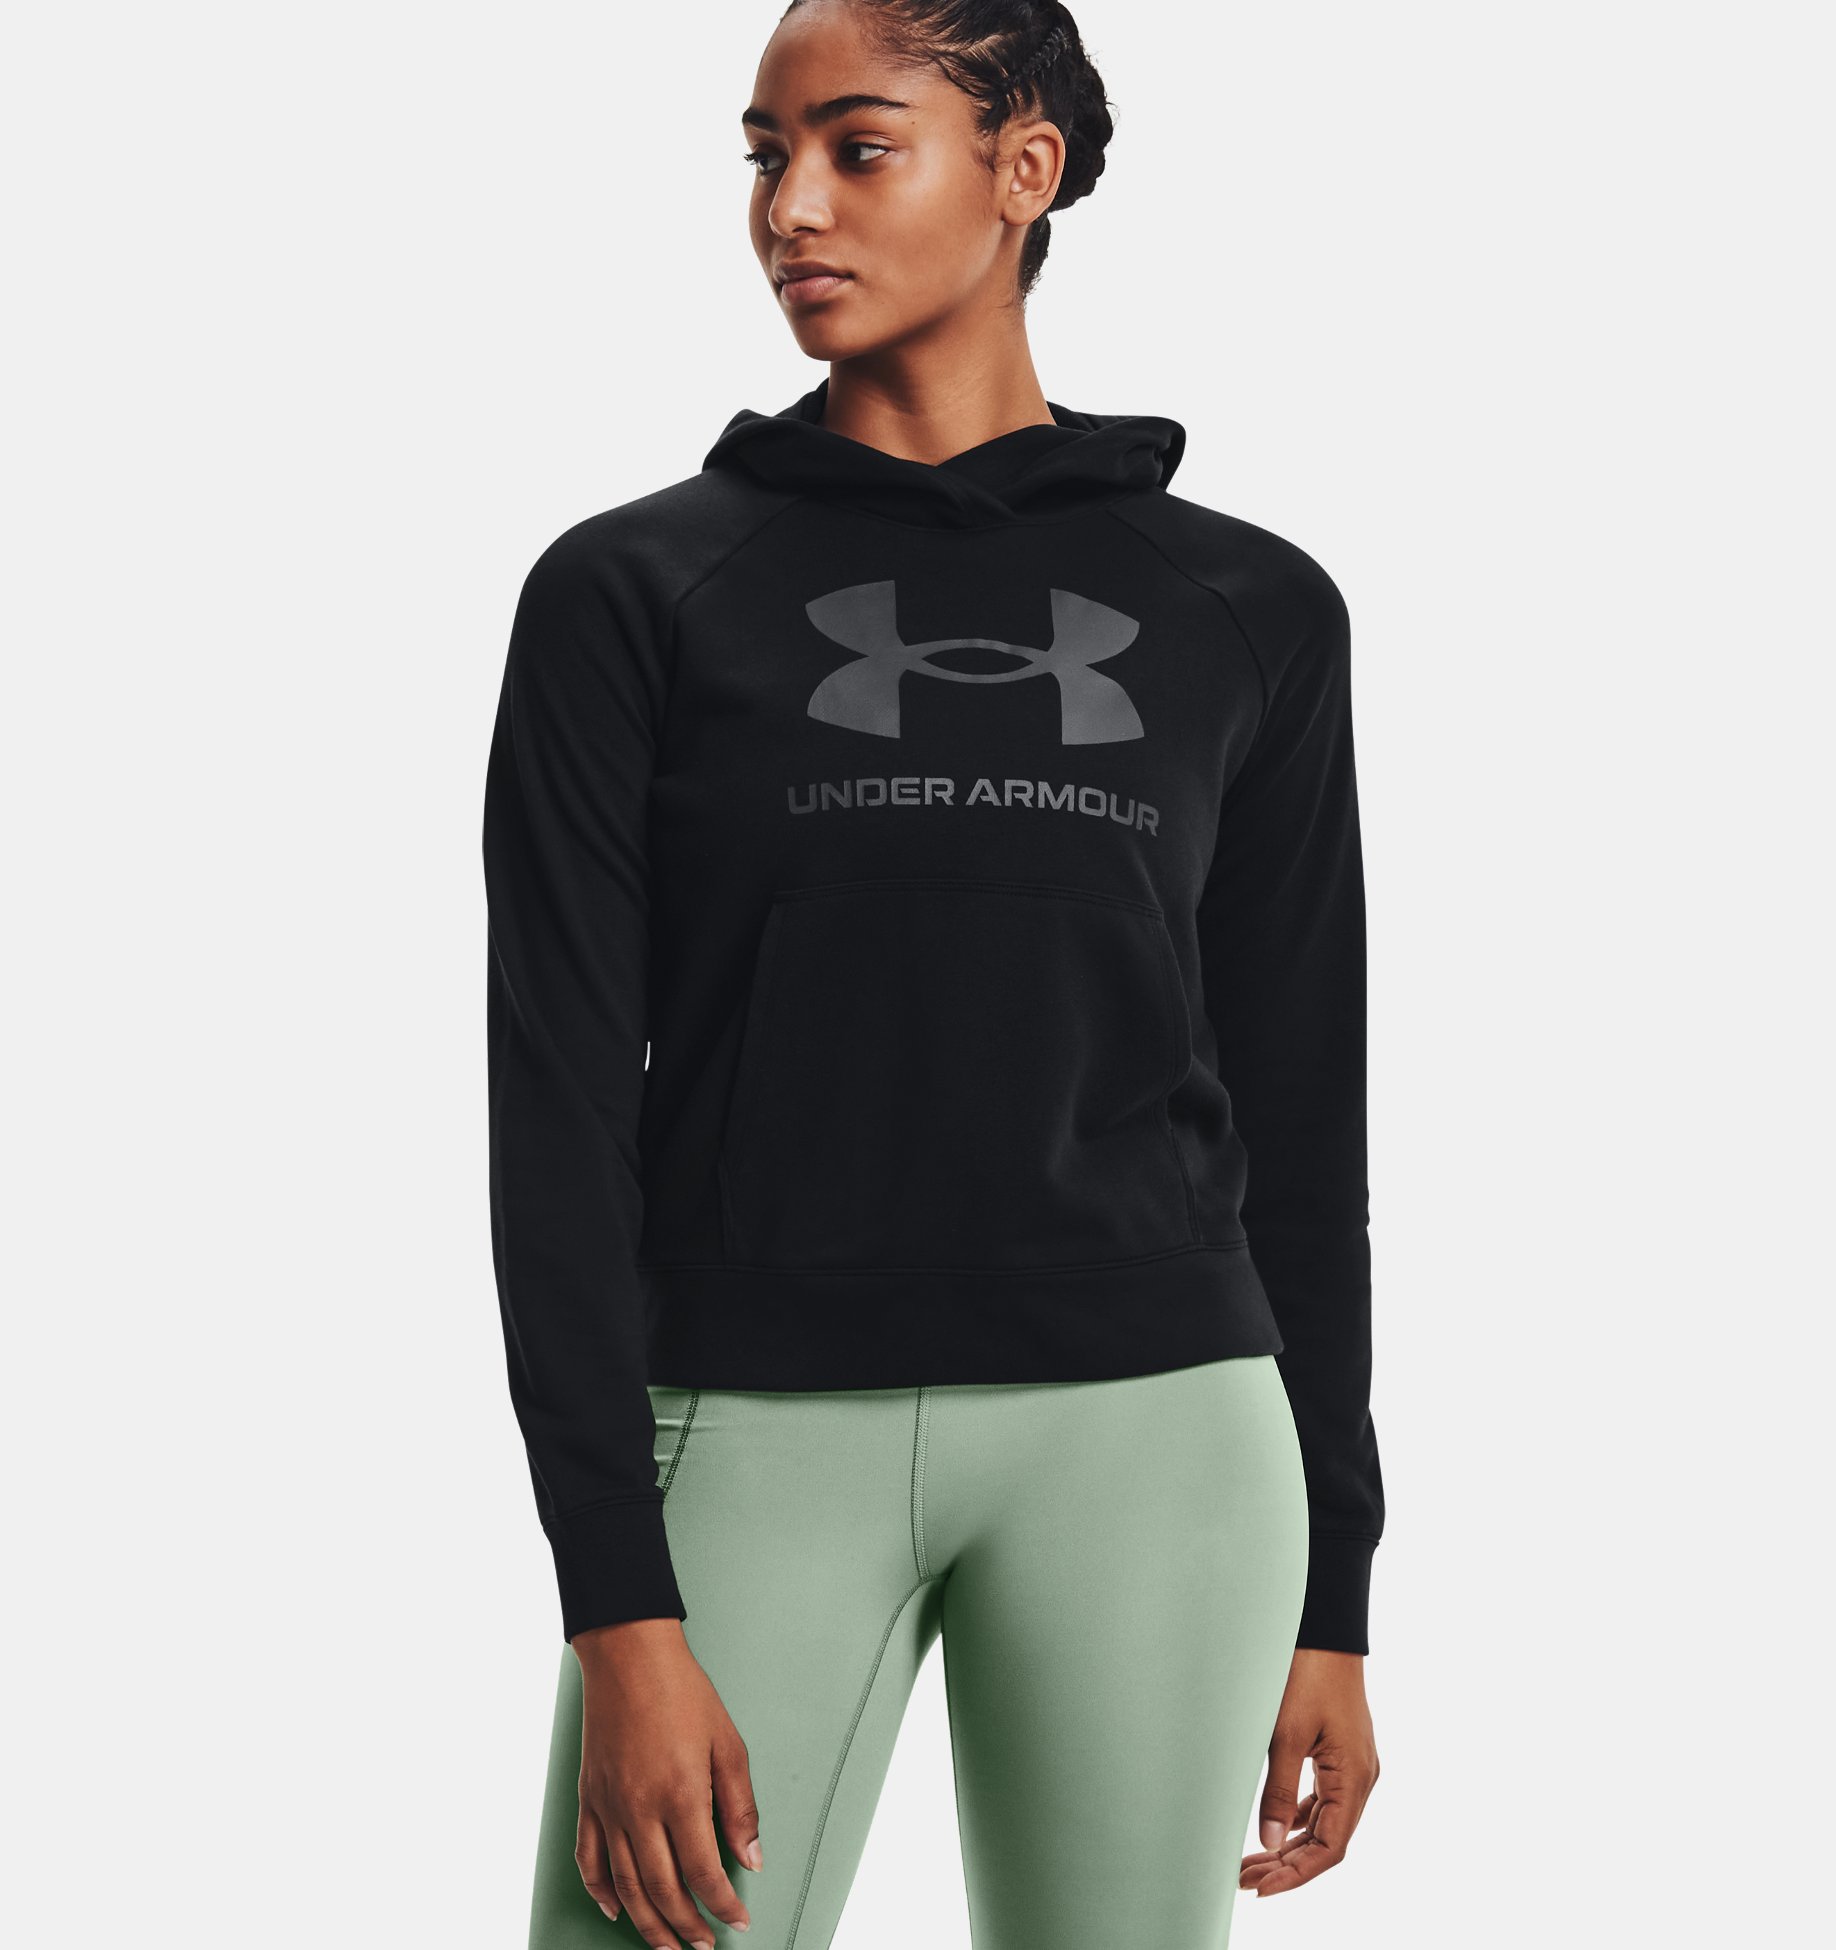 Under Armour Hoodies for as low as $14.98